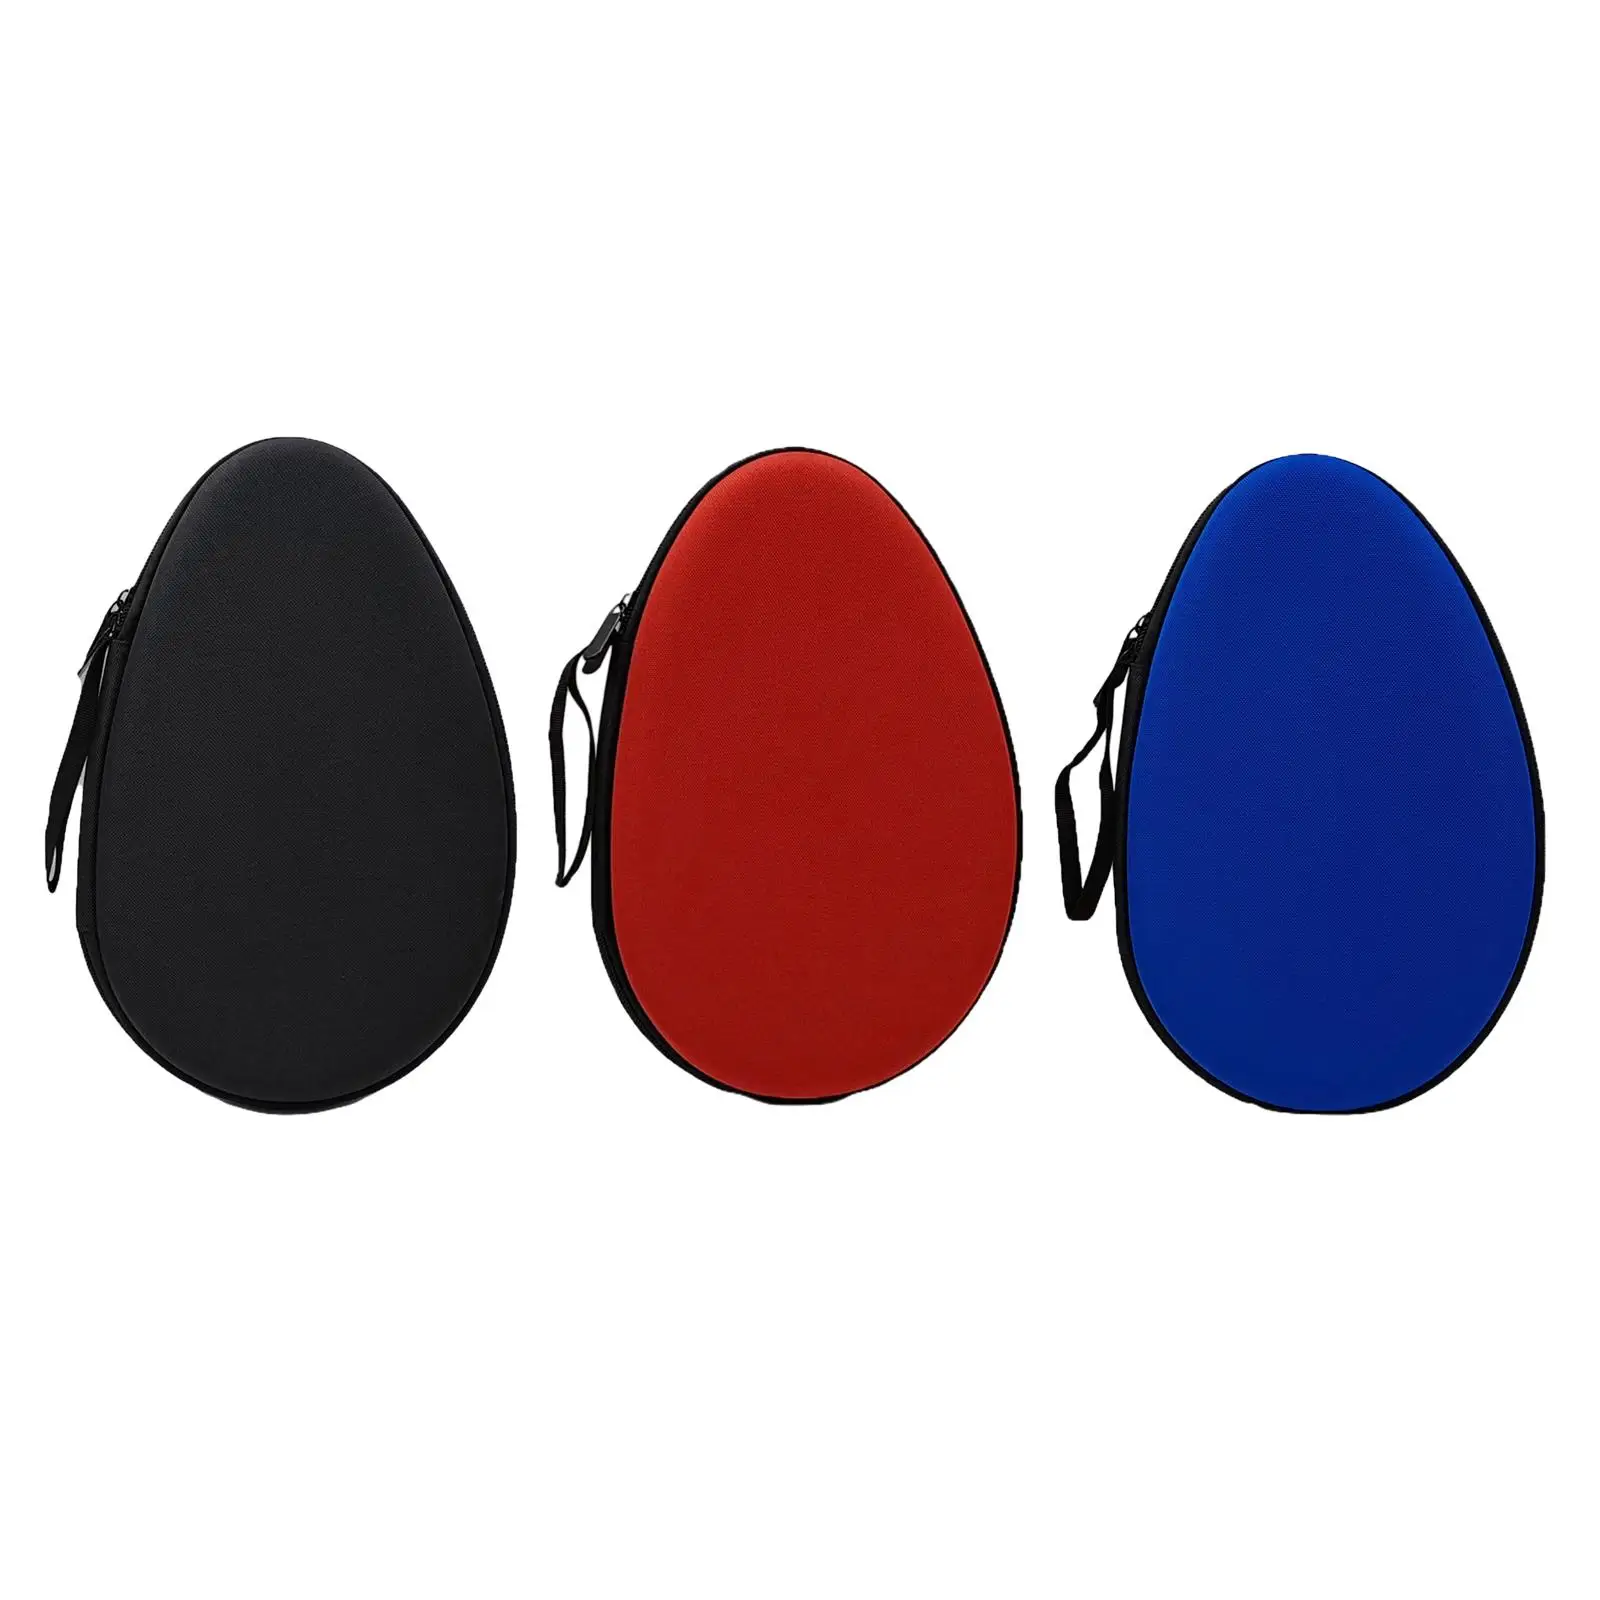 Portable Table Tennis Racket Case Sturdy Hard Gourd Durable Wear Resistant Ping Pong Paddle Bag for Competition Indoor Training